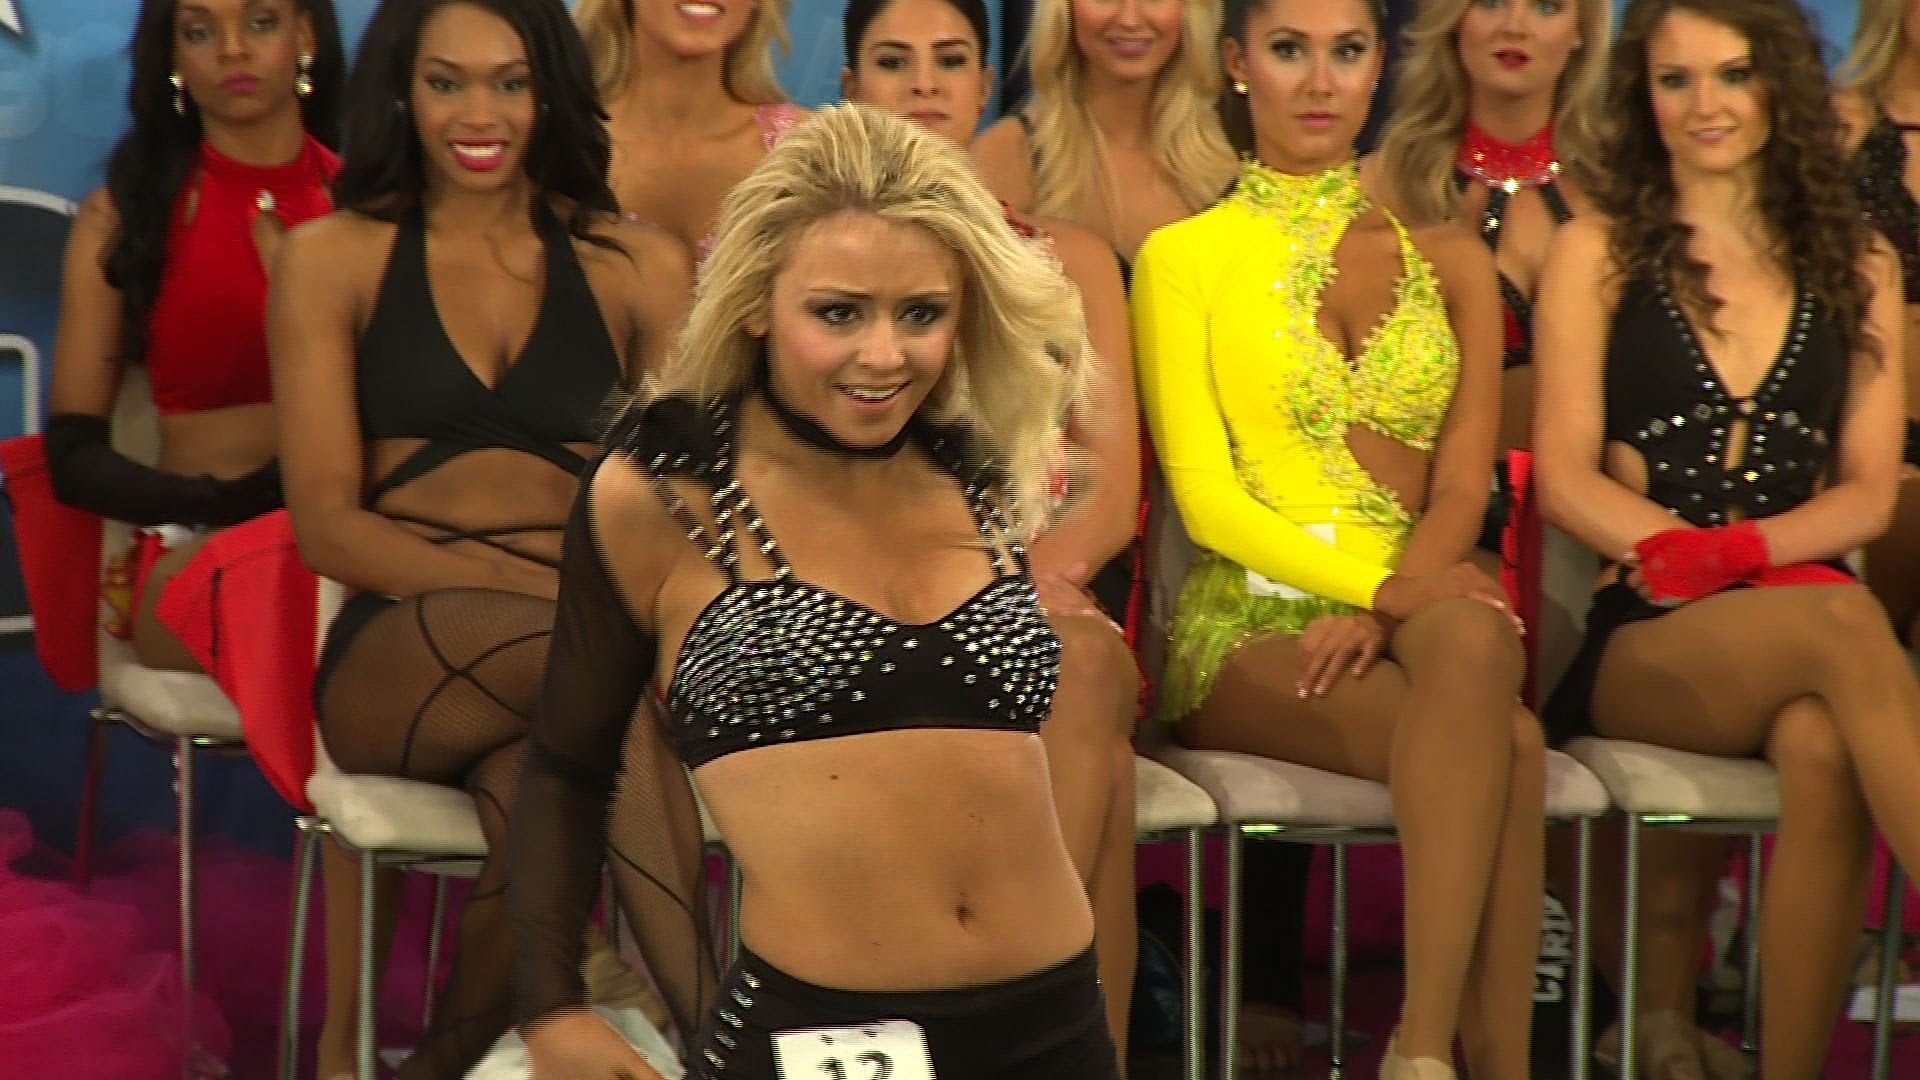 1920x1080 Watch the Dallas Cowboys Cheerleaders final auditions - YouTube